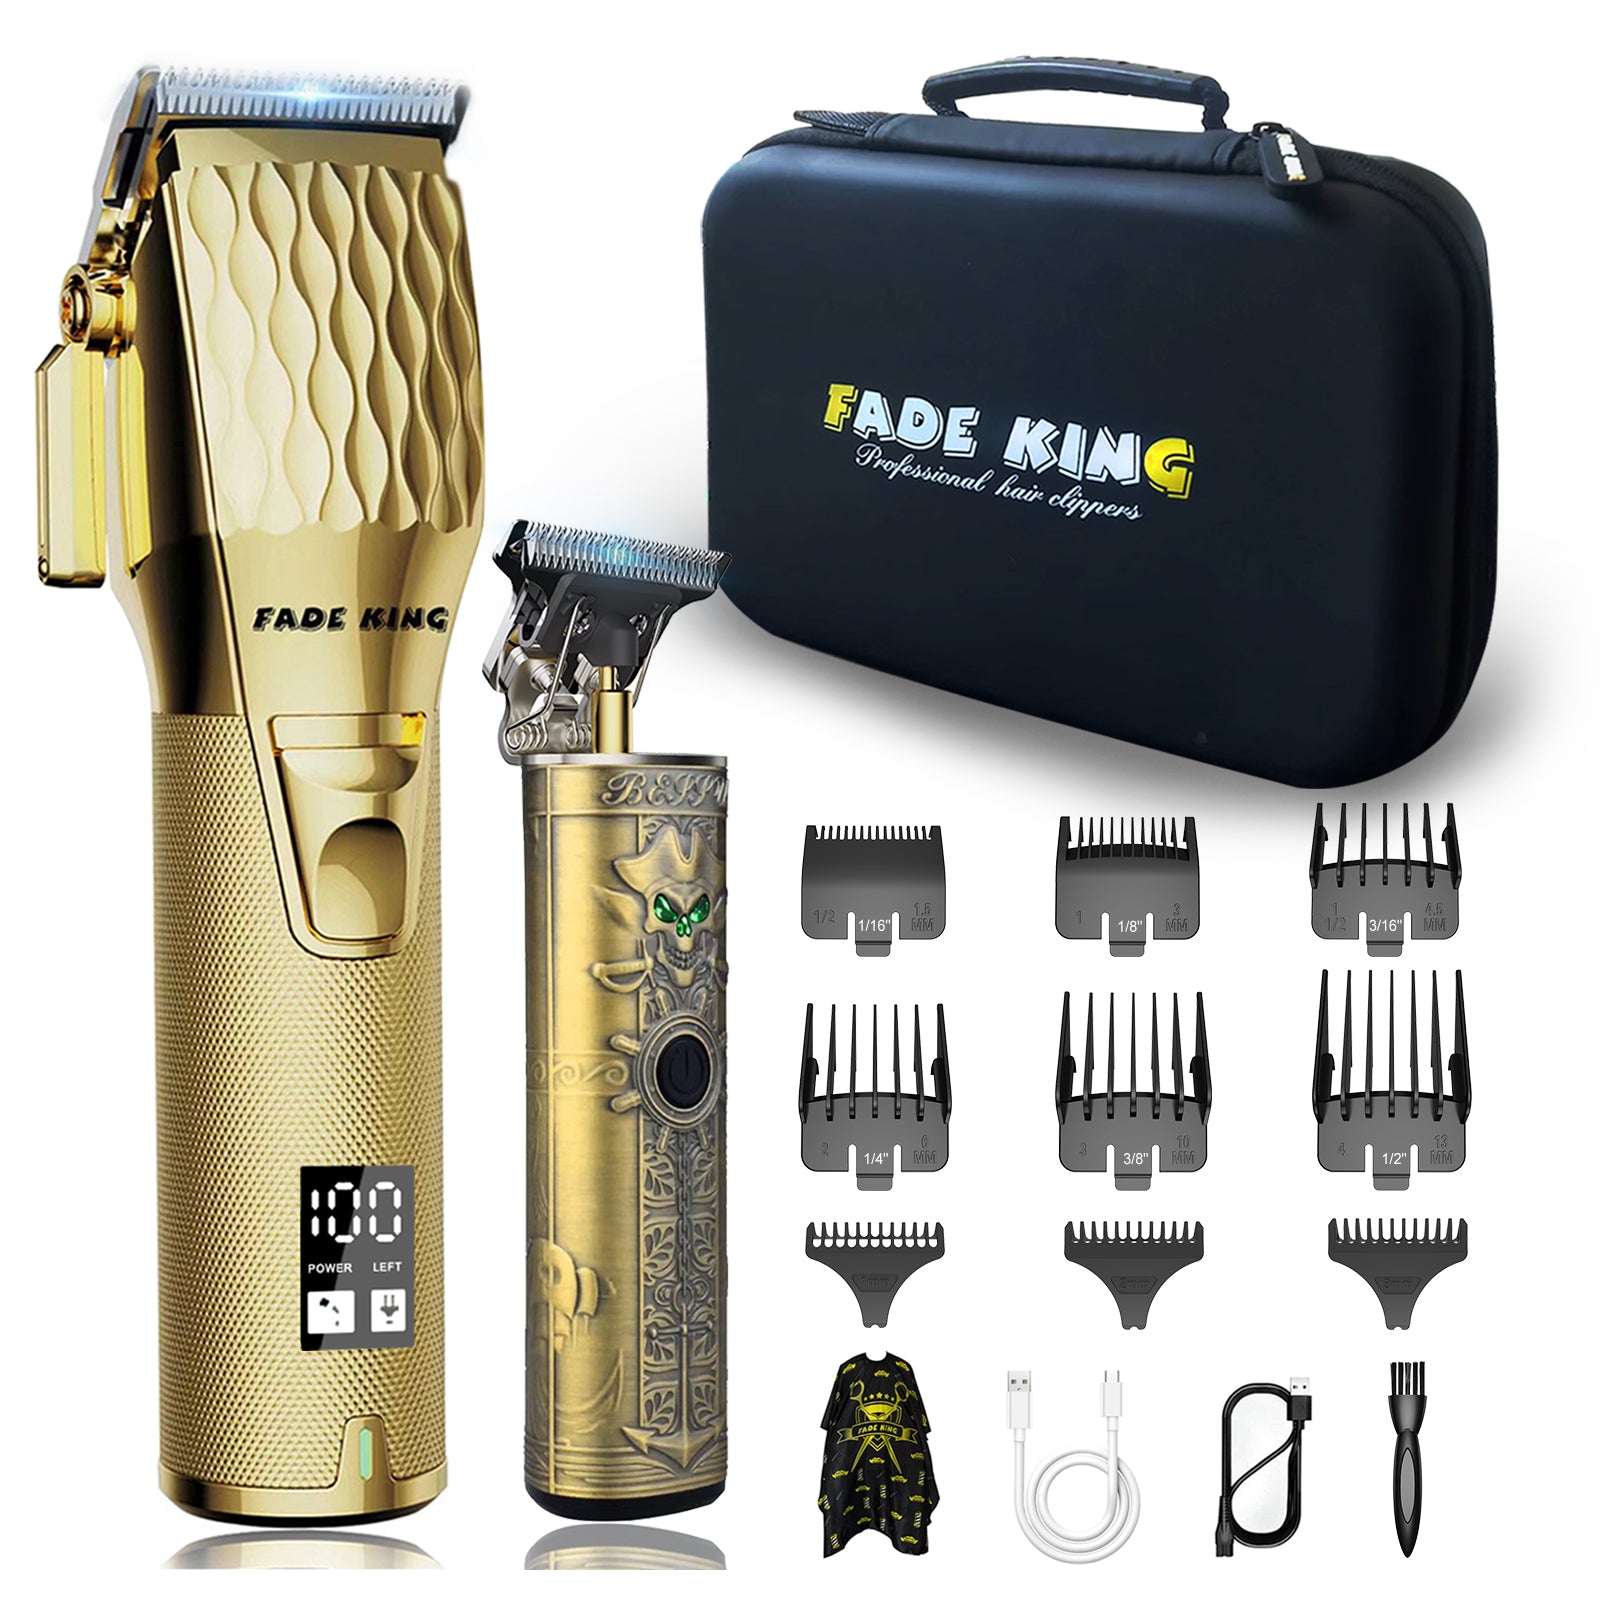 FADEKING Professional Men's Hair Clippers and Trimmer Set